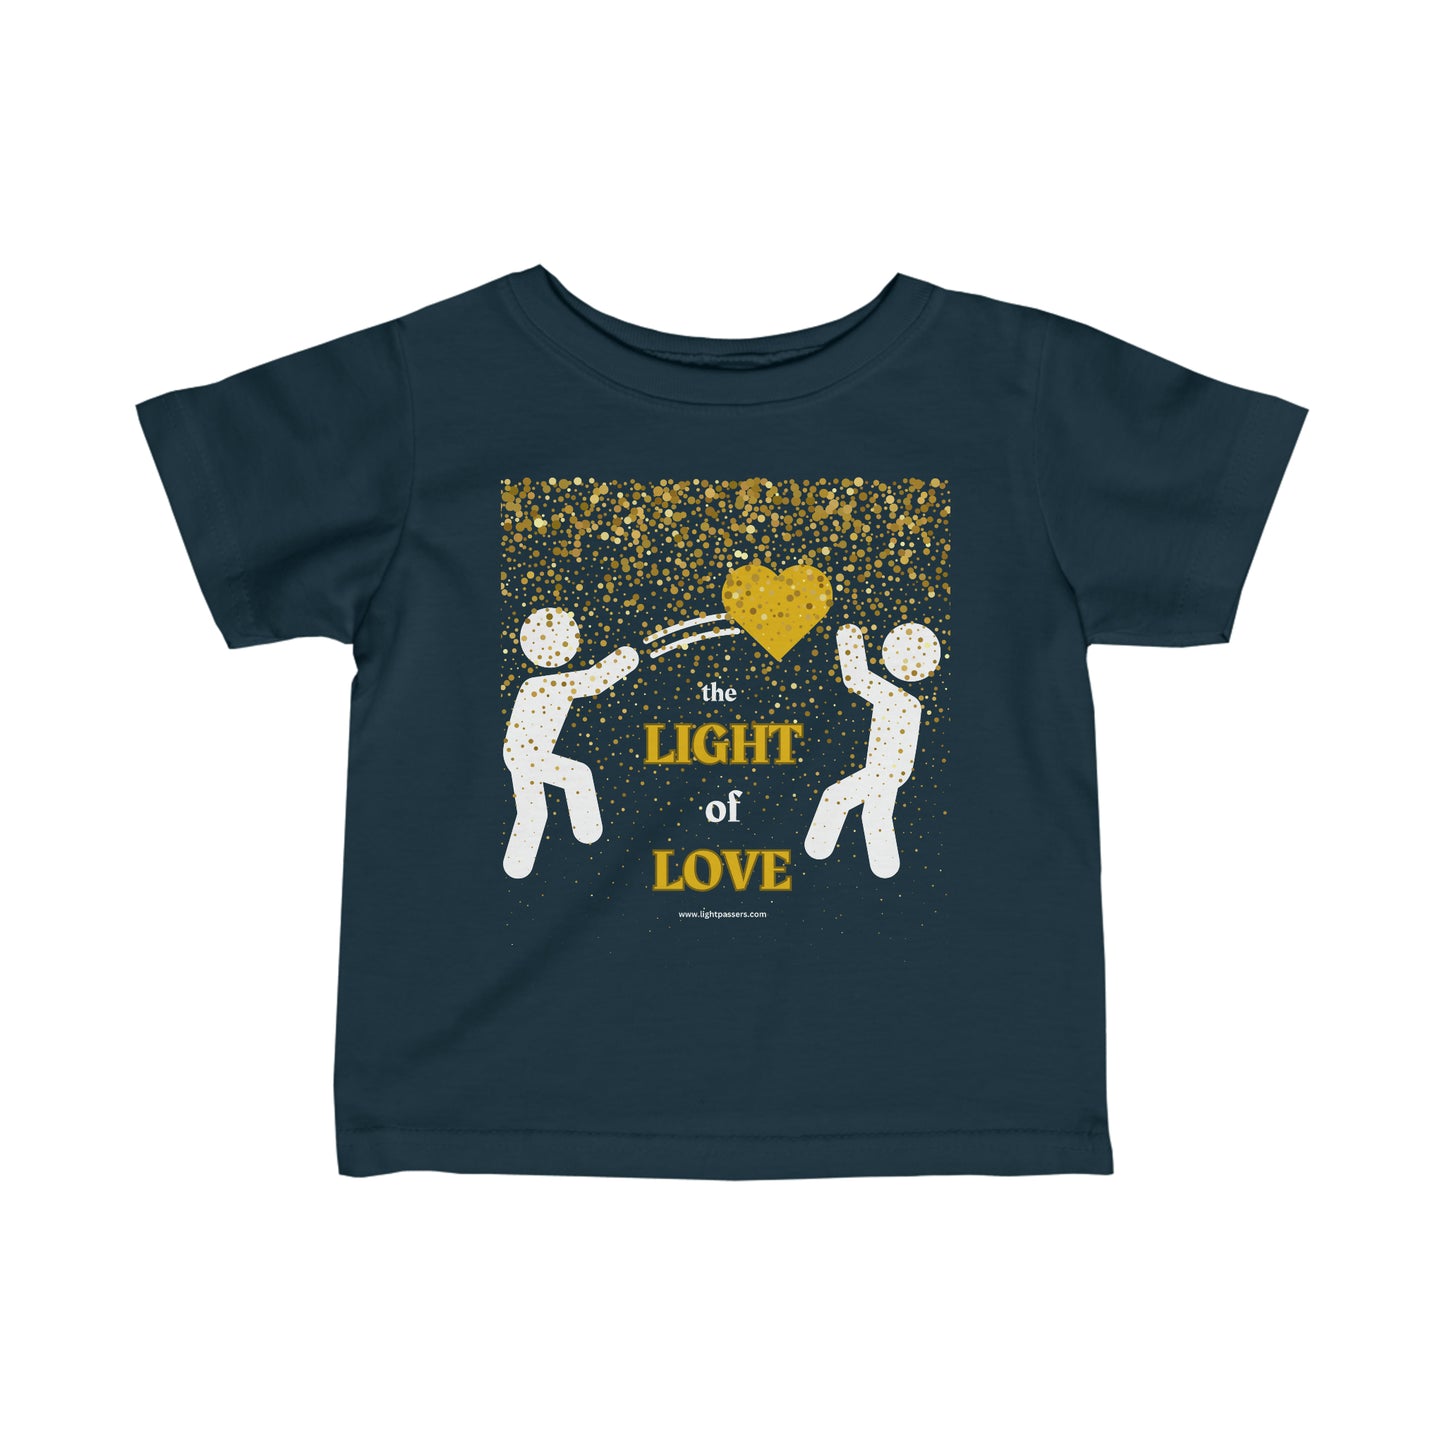 Infant fine jersey tee with a gold heart design, taped shoulders, and ribbed knitting for durability. Comfortable, classic fit in light fabric.